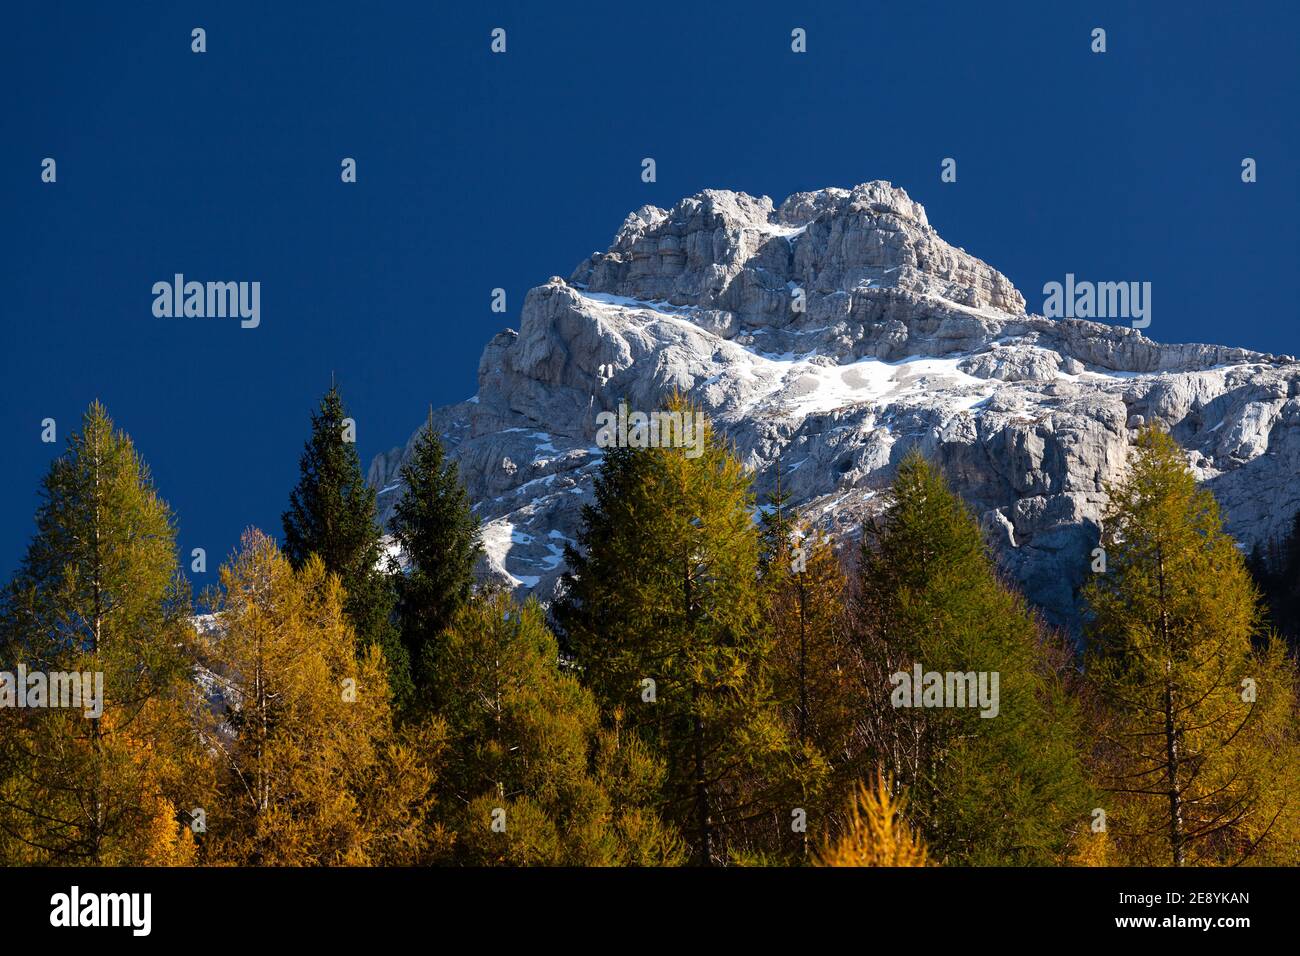 The snow-capped Razor Mountain above the Trenta Valley with autumn-colored larch trees in the foreground. Stock Photo